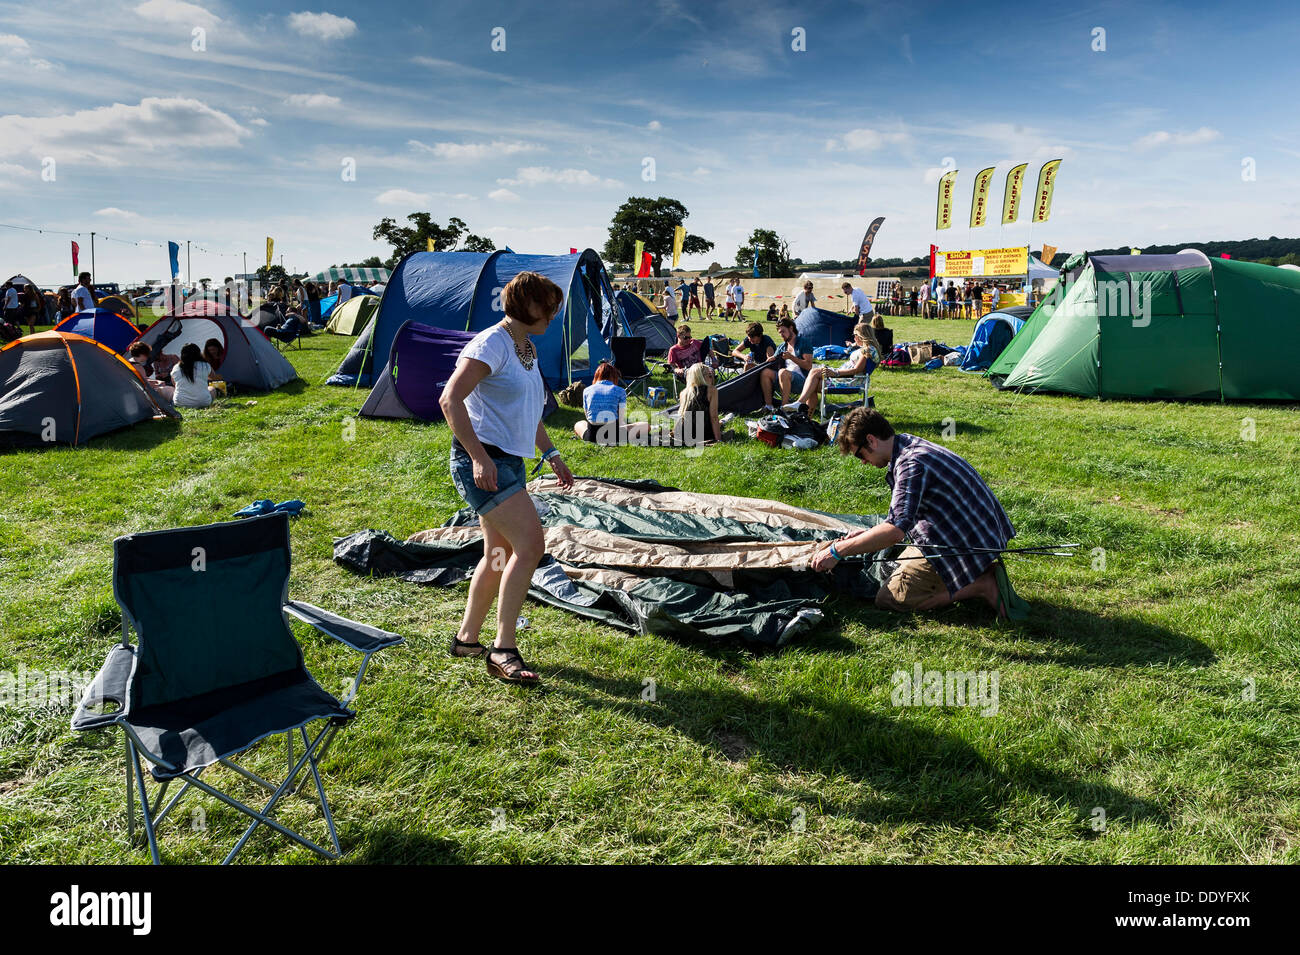 Festivalgoers erecting a tent at the Brownstock Festival in Essex. Stock Photo